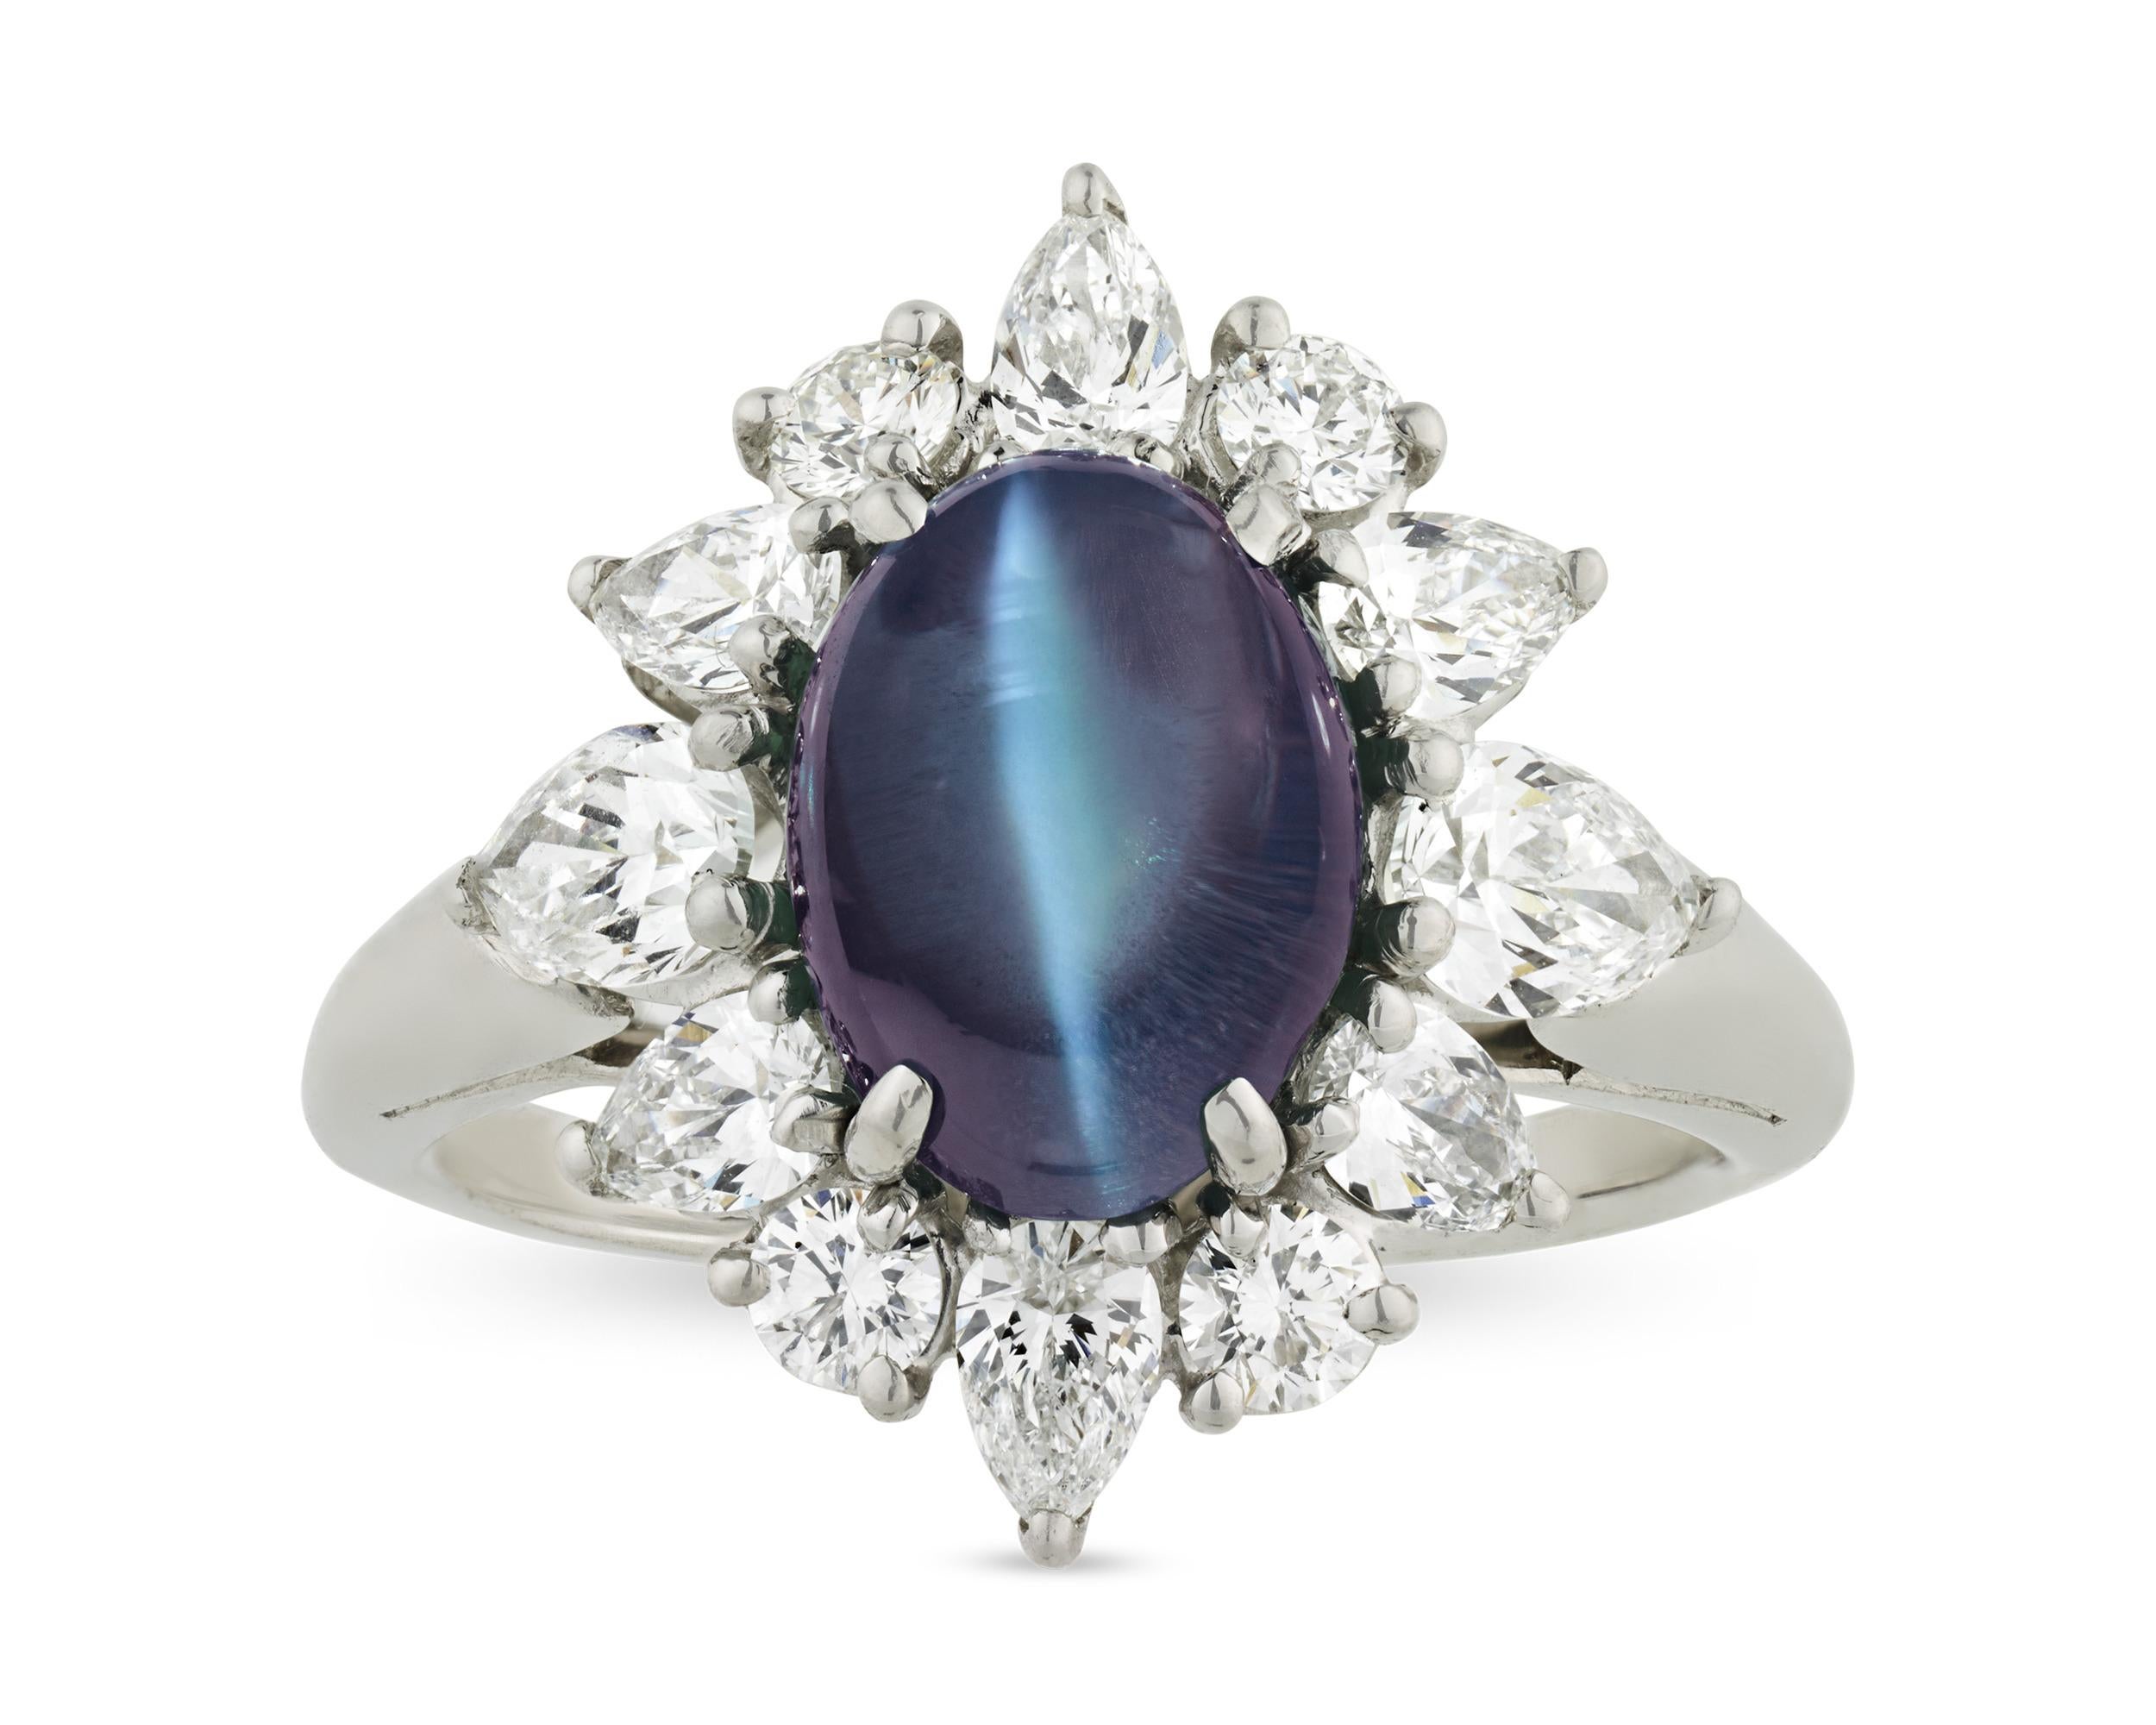 Weighing 3.65 carats, the captivating cat's eye alexandrite in this Oscar Heyman creation exhibits the unique color change for which these rare stones are legendary. The cabochon stone displays a lovely bluish yellowish green hue in daylight and a